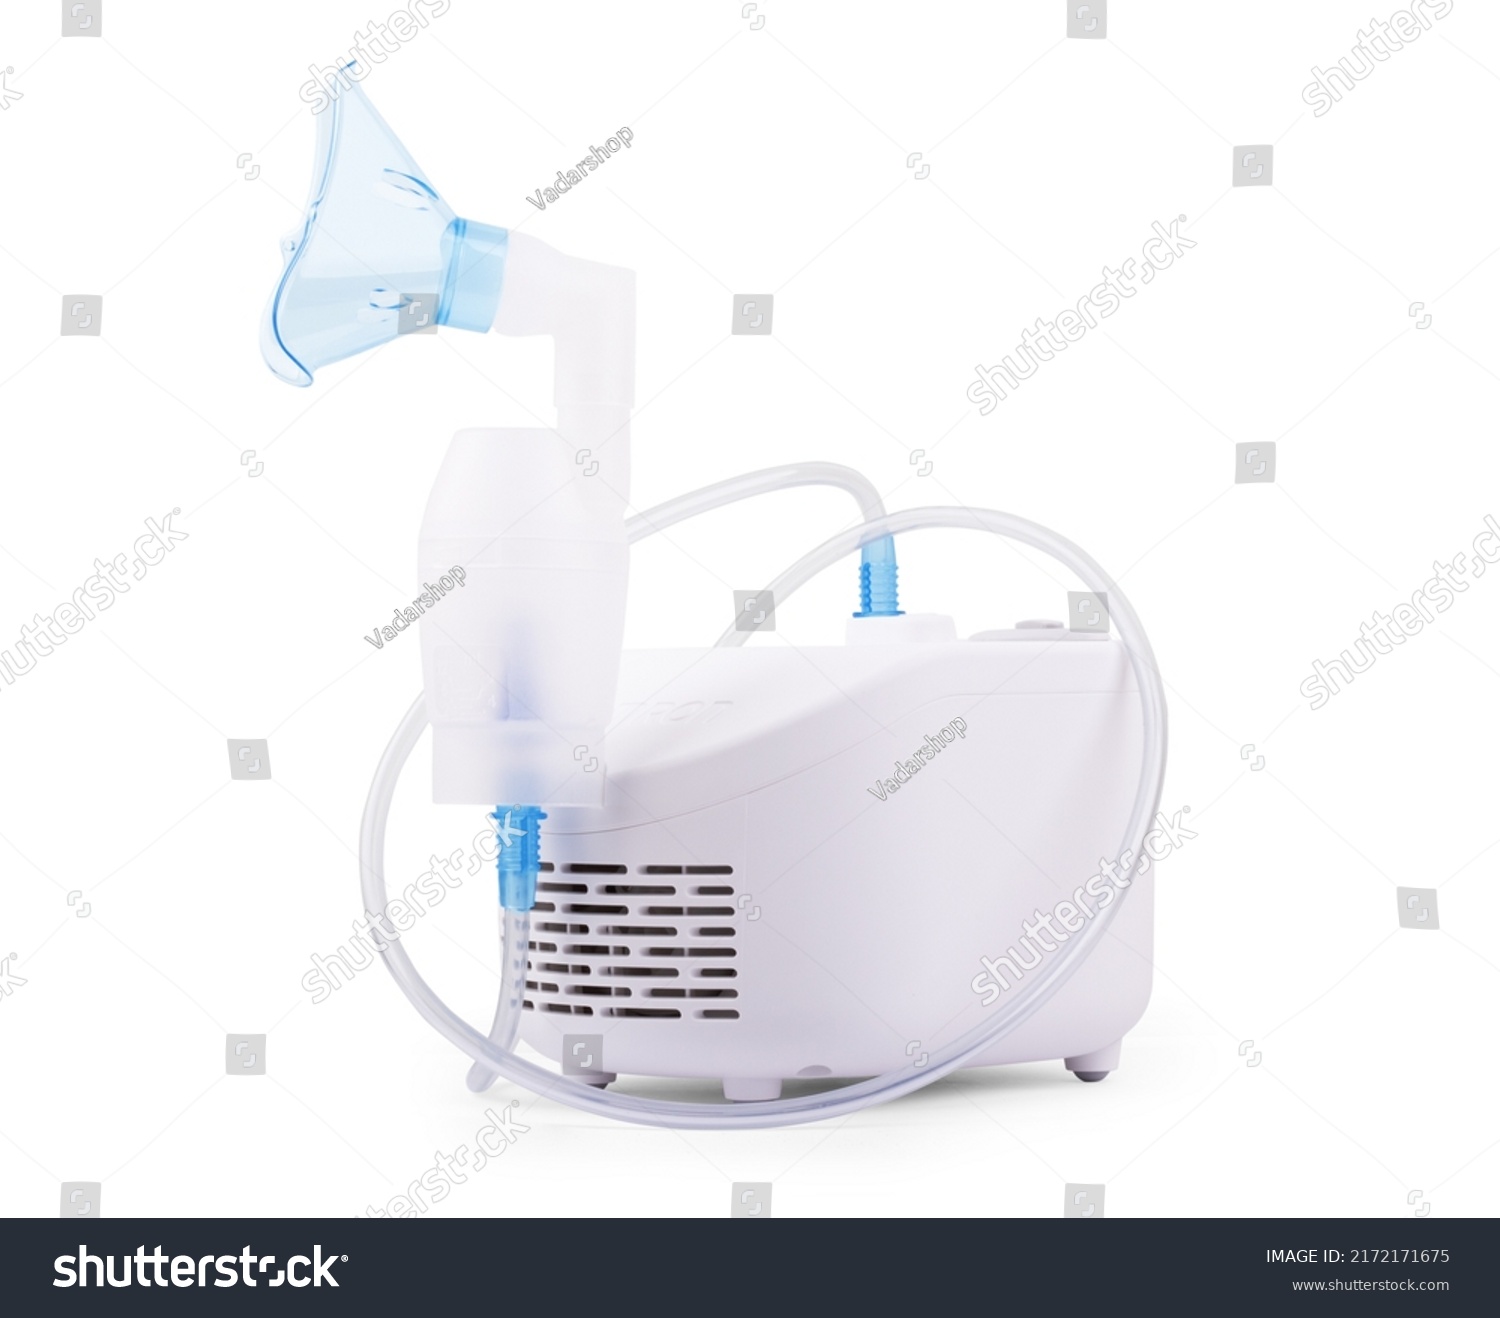 Ultrasonic nebulizer and medicines on a white background  #2172171675